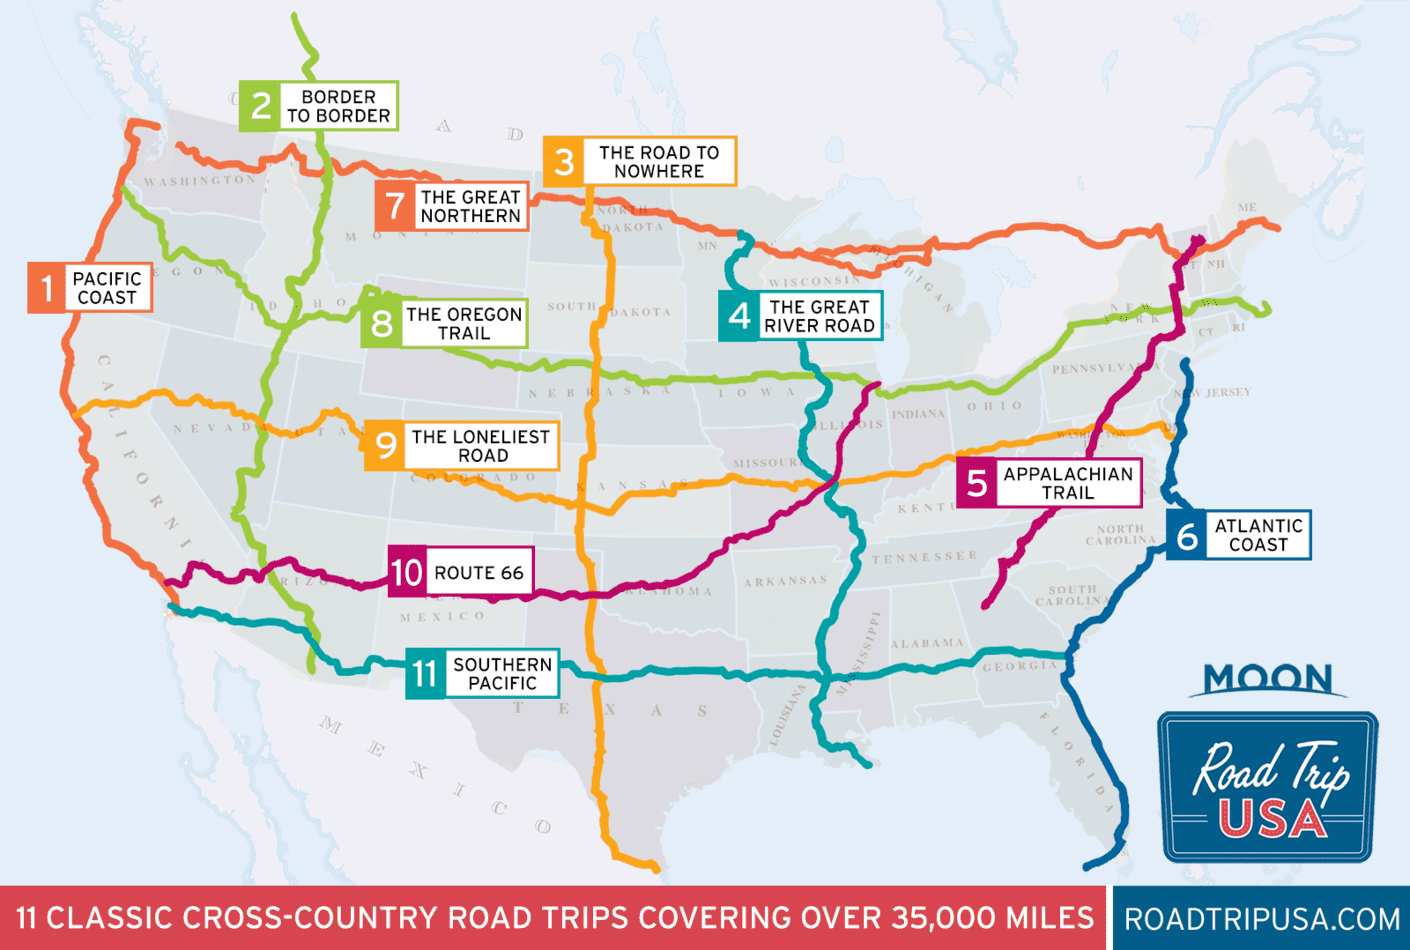 Map from Road Trip USA showing several major cross country routes including the Southern Pacific, Route 66, The Loneliest Road, The Oregon Trail and More.